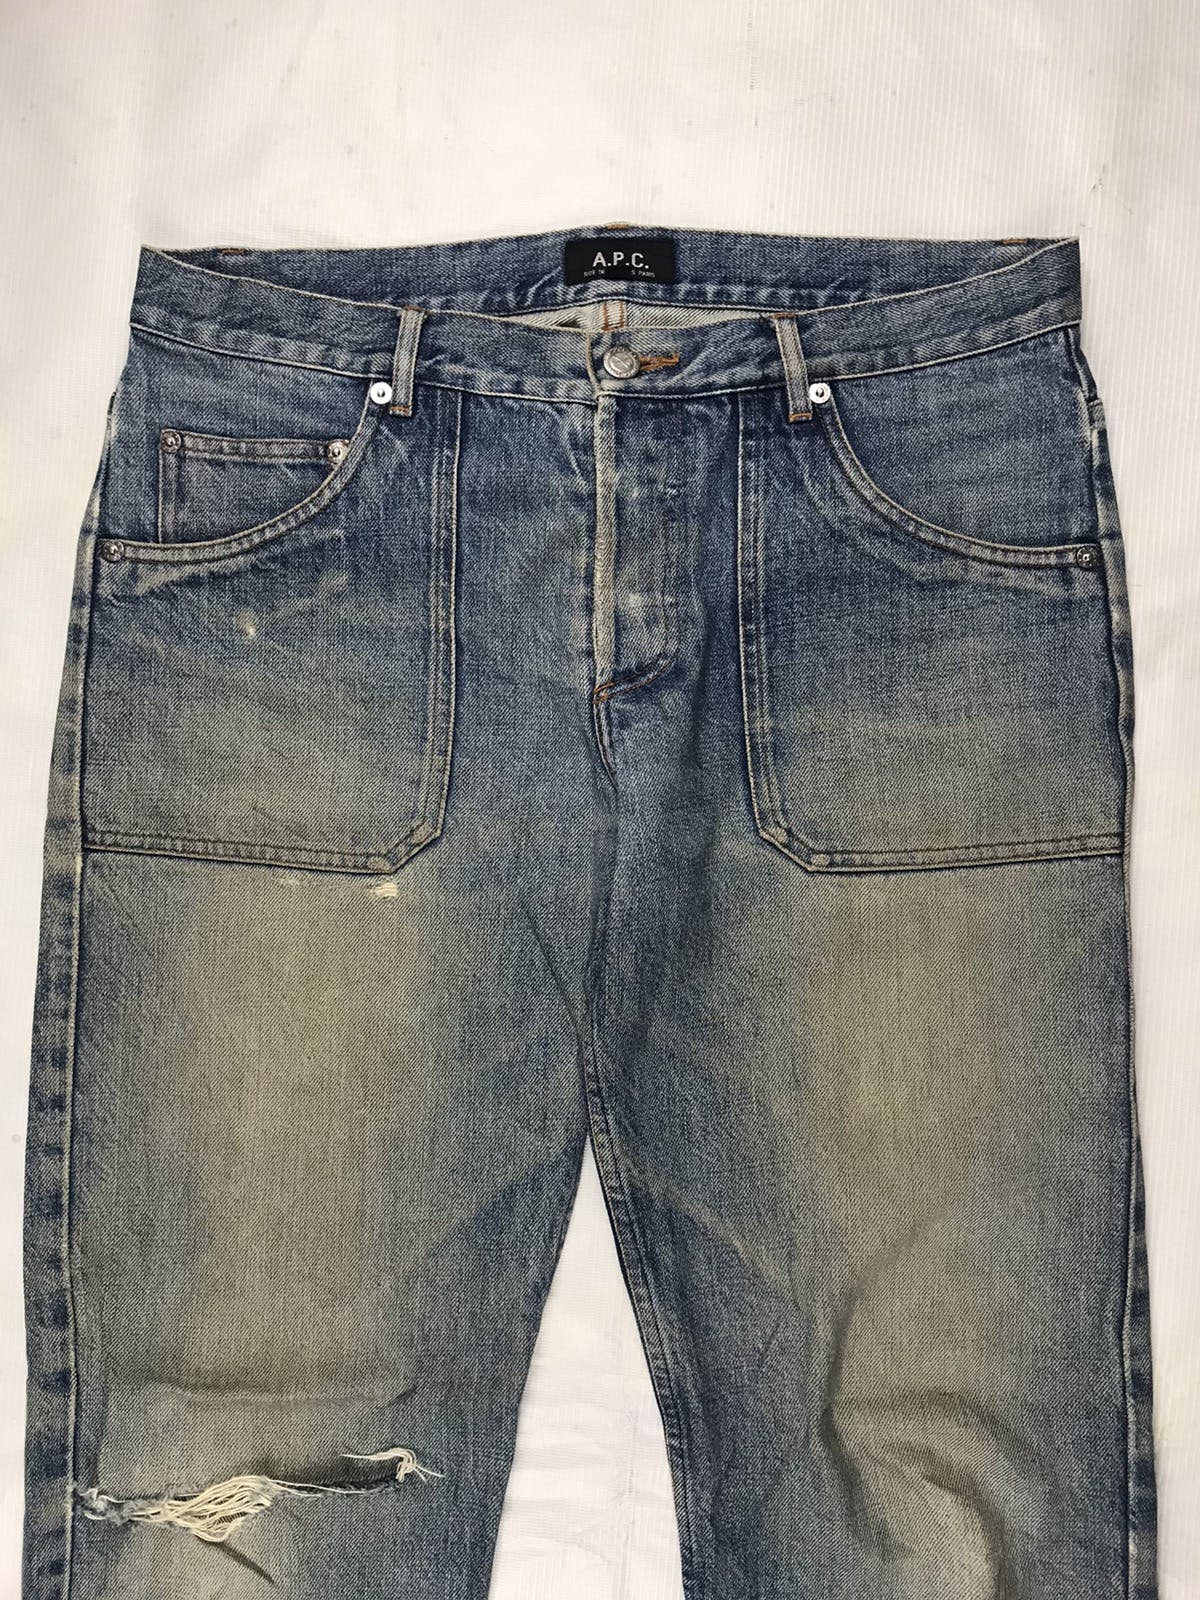 Rare!! A.P.C patch pocket distressed denim Made in Japan - 2